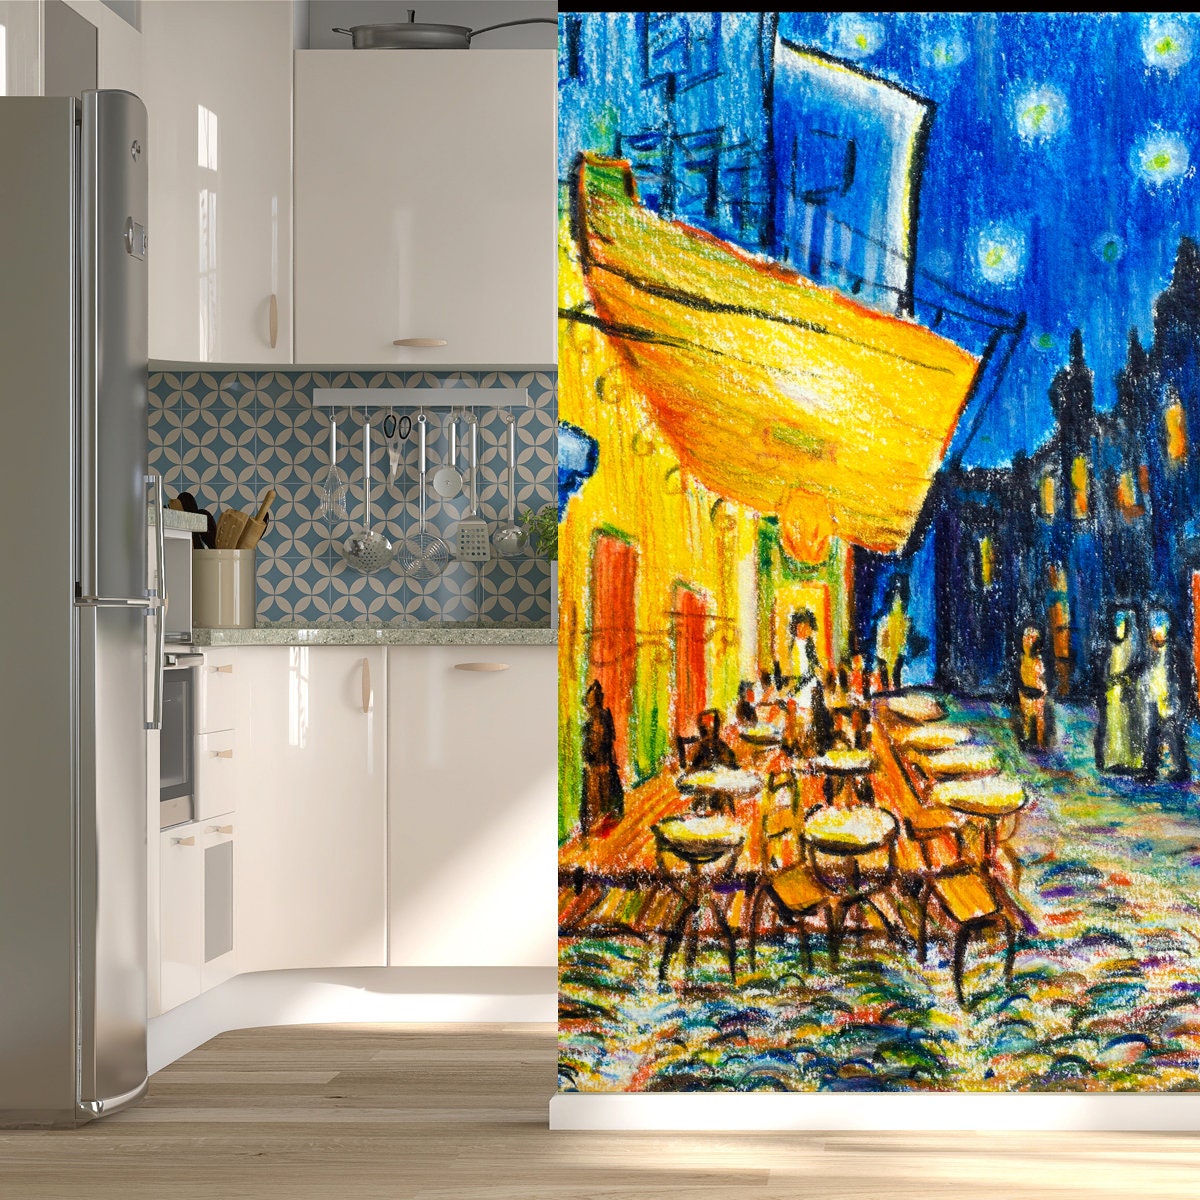 Painting by Van Gogh "Cafe Terrace at Night" Wallpaper Kitchen Mural